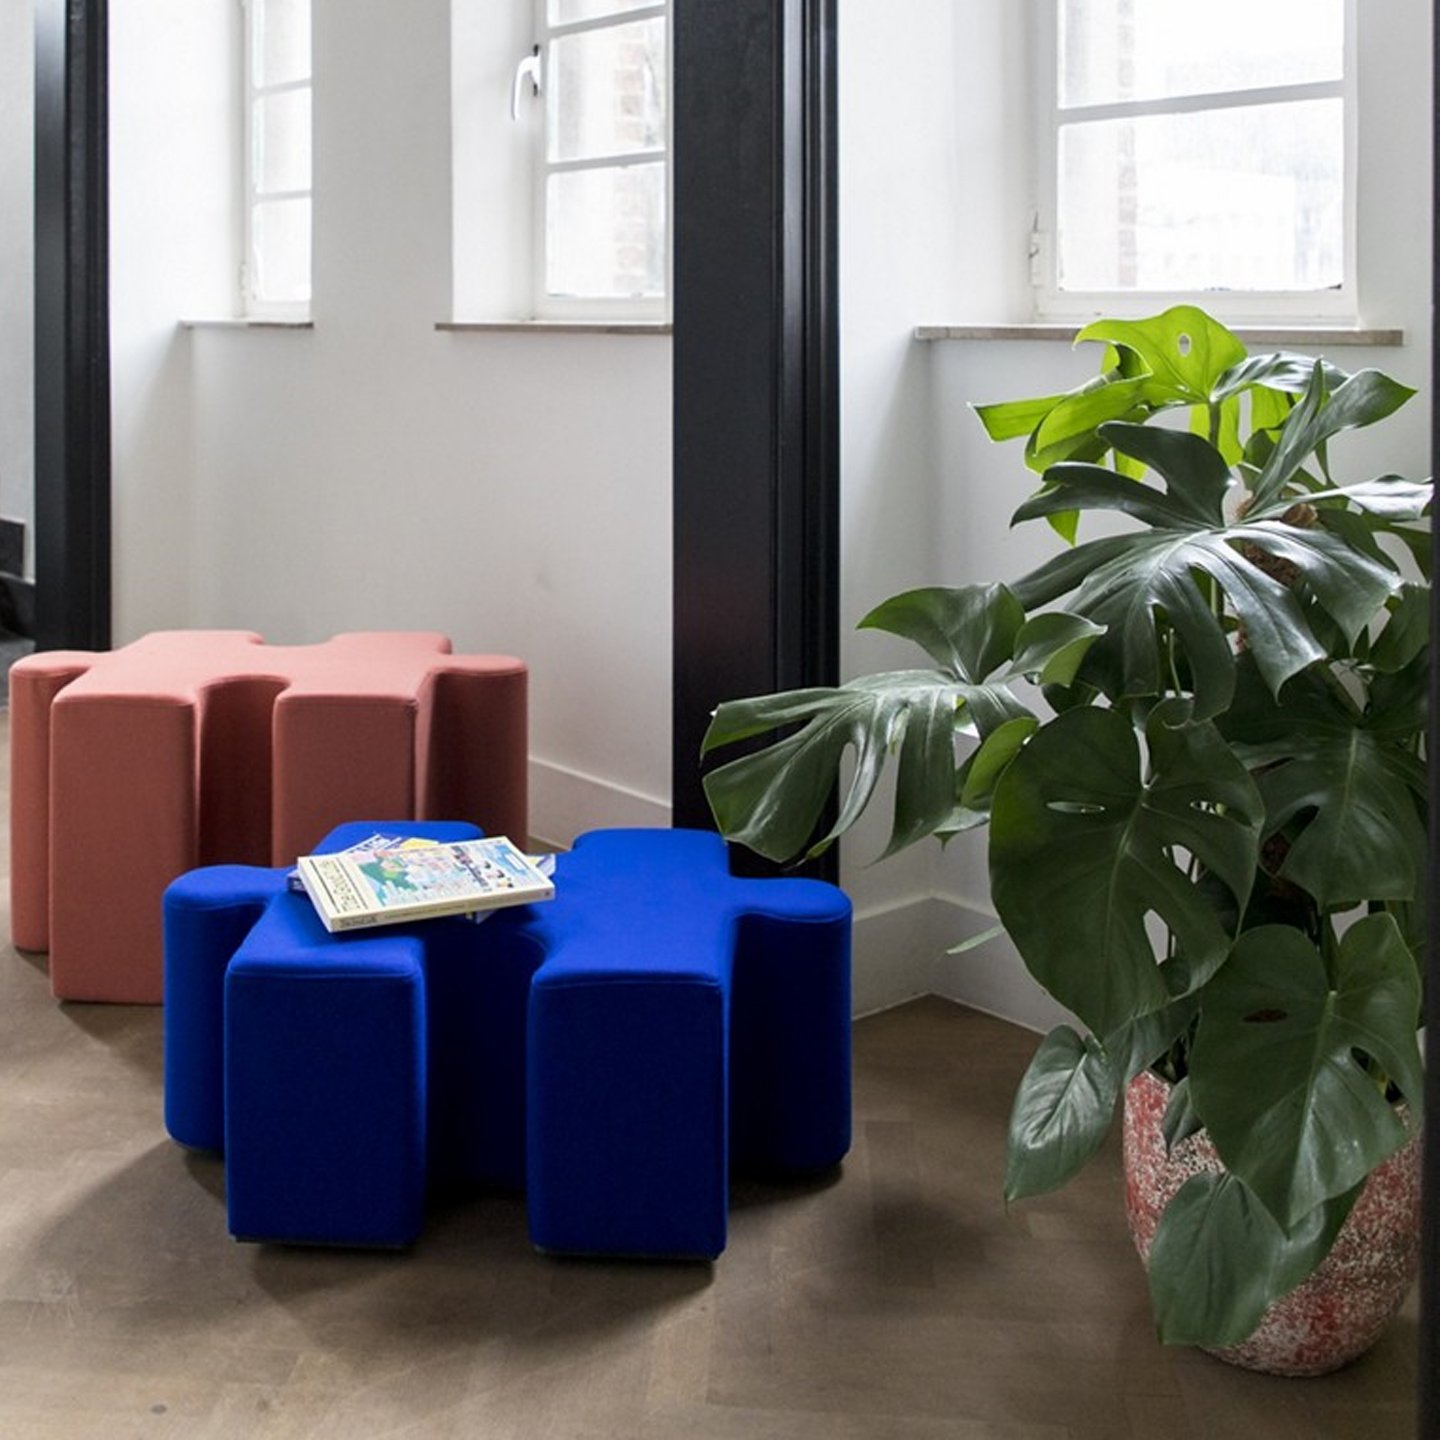 Haworth Buzzipuzzle poufs in pink and blue colors in a office corner space